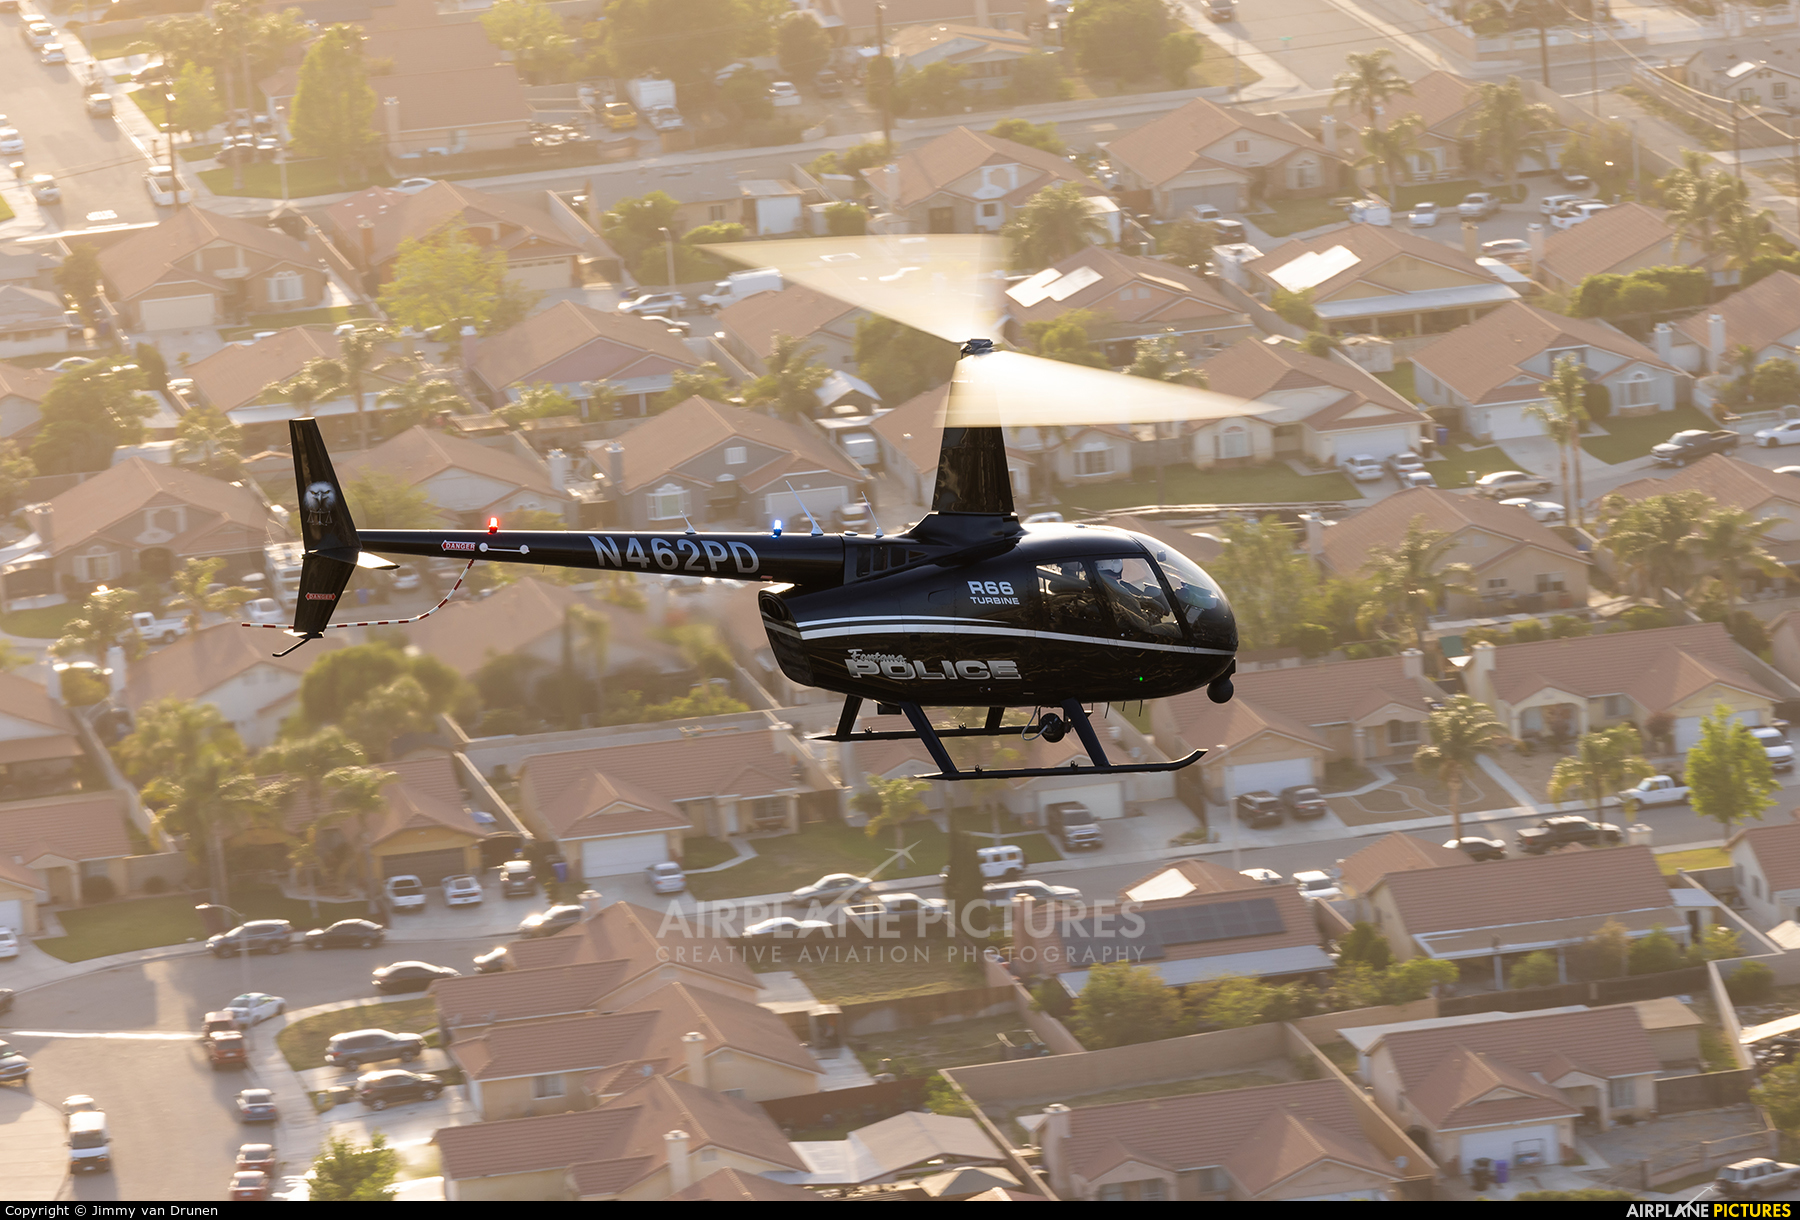 Fontana Police Air Support Unit N462PD aircraft at In Flight - California